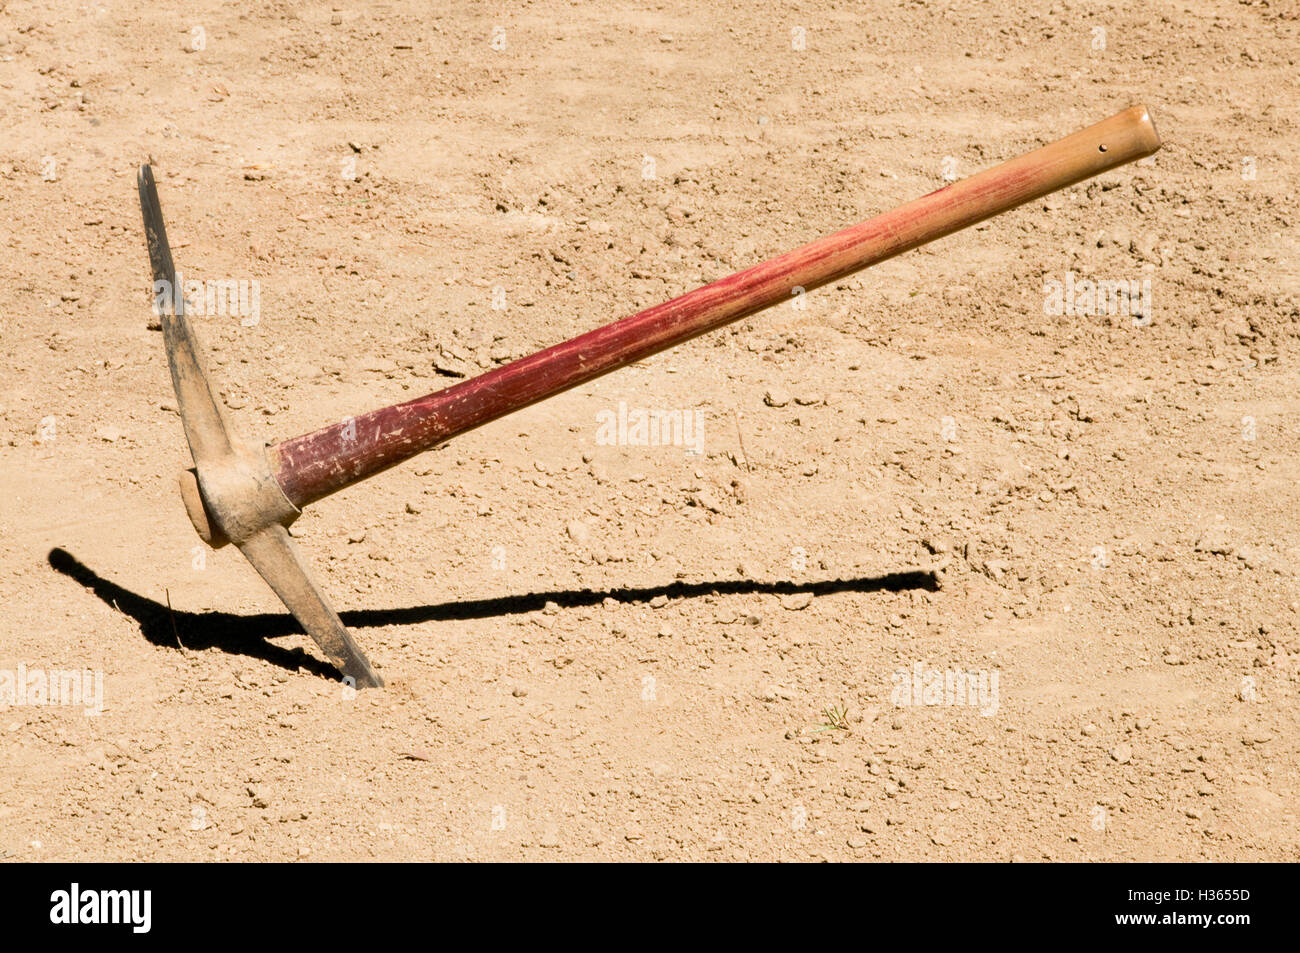 Worn distressed pick ax plunged into dirt ground Stock Photo